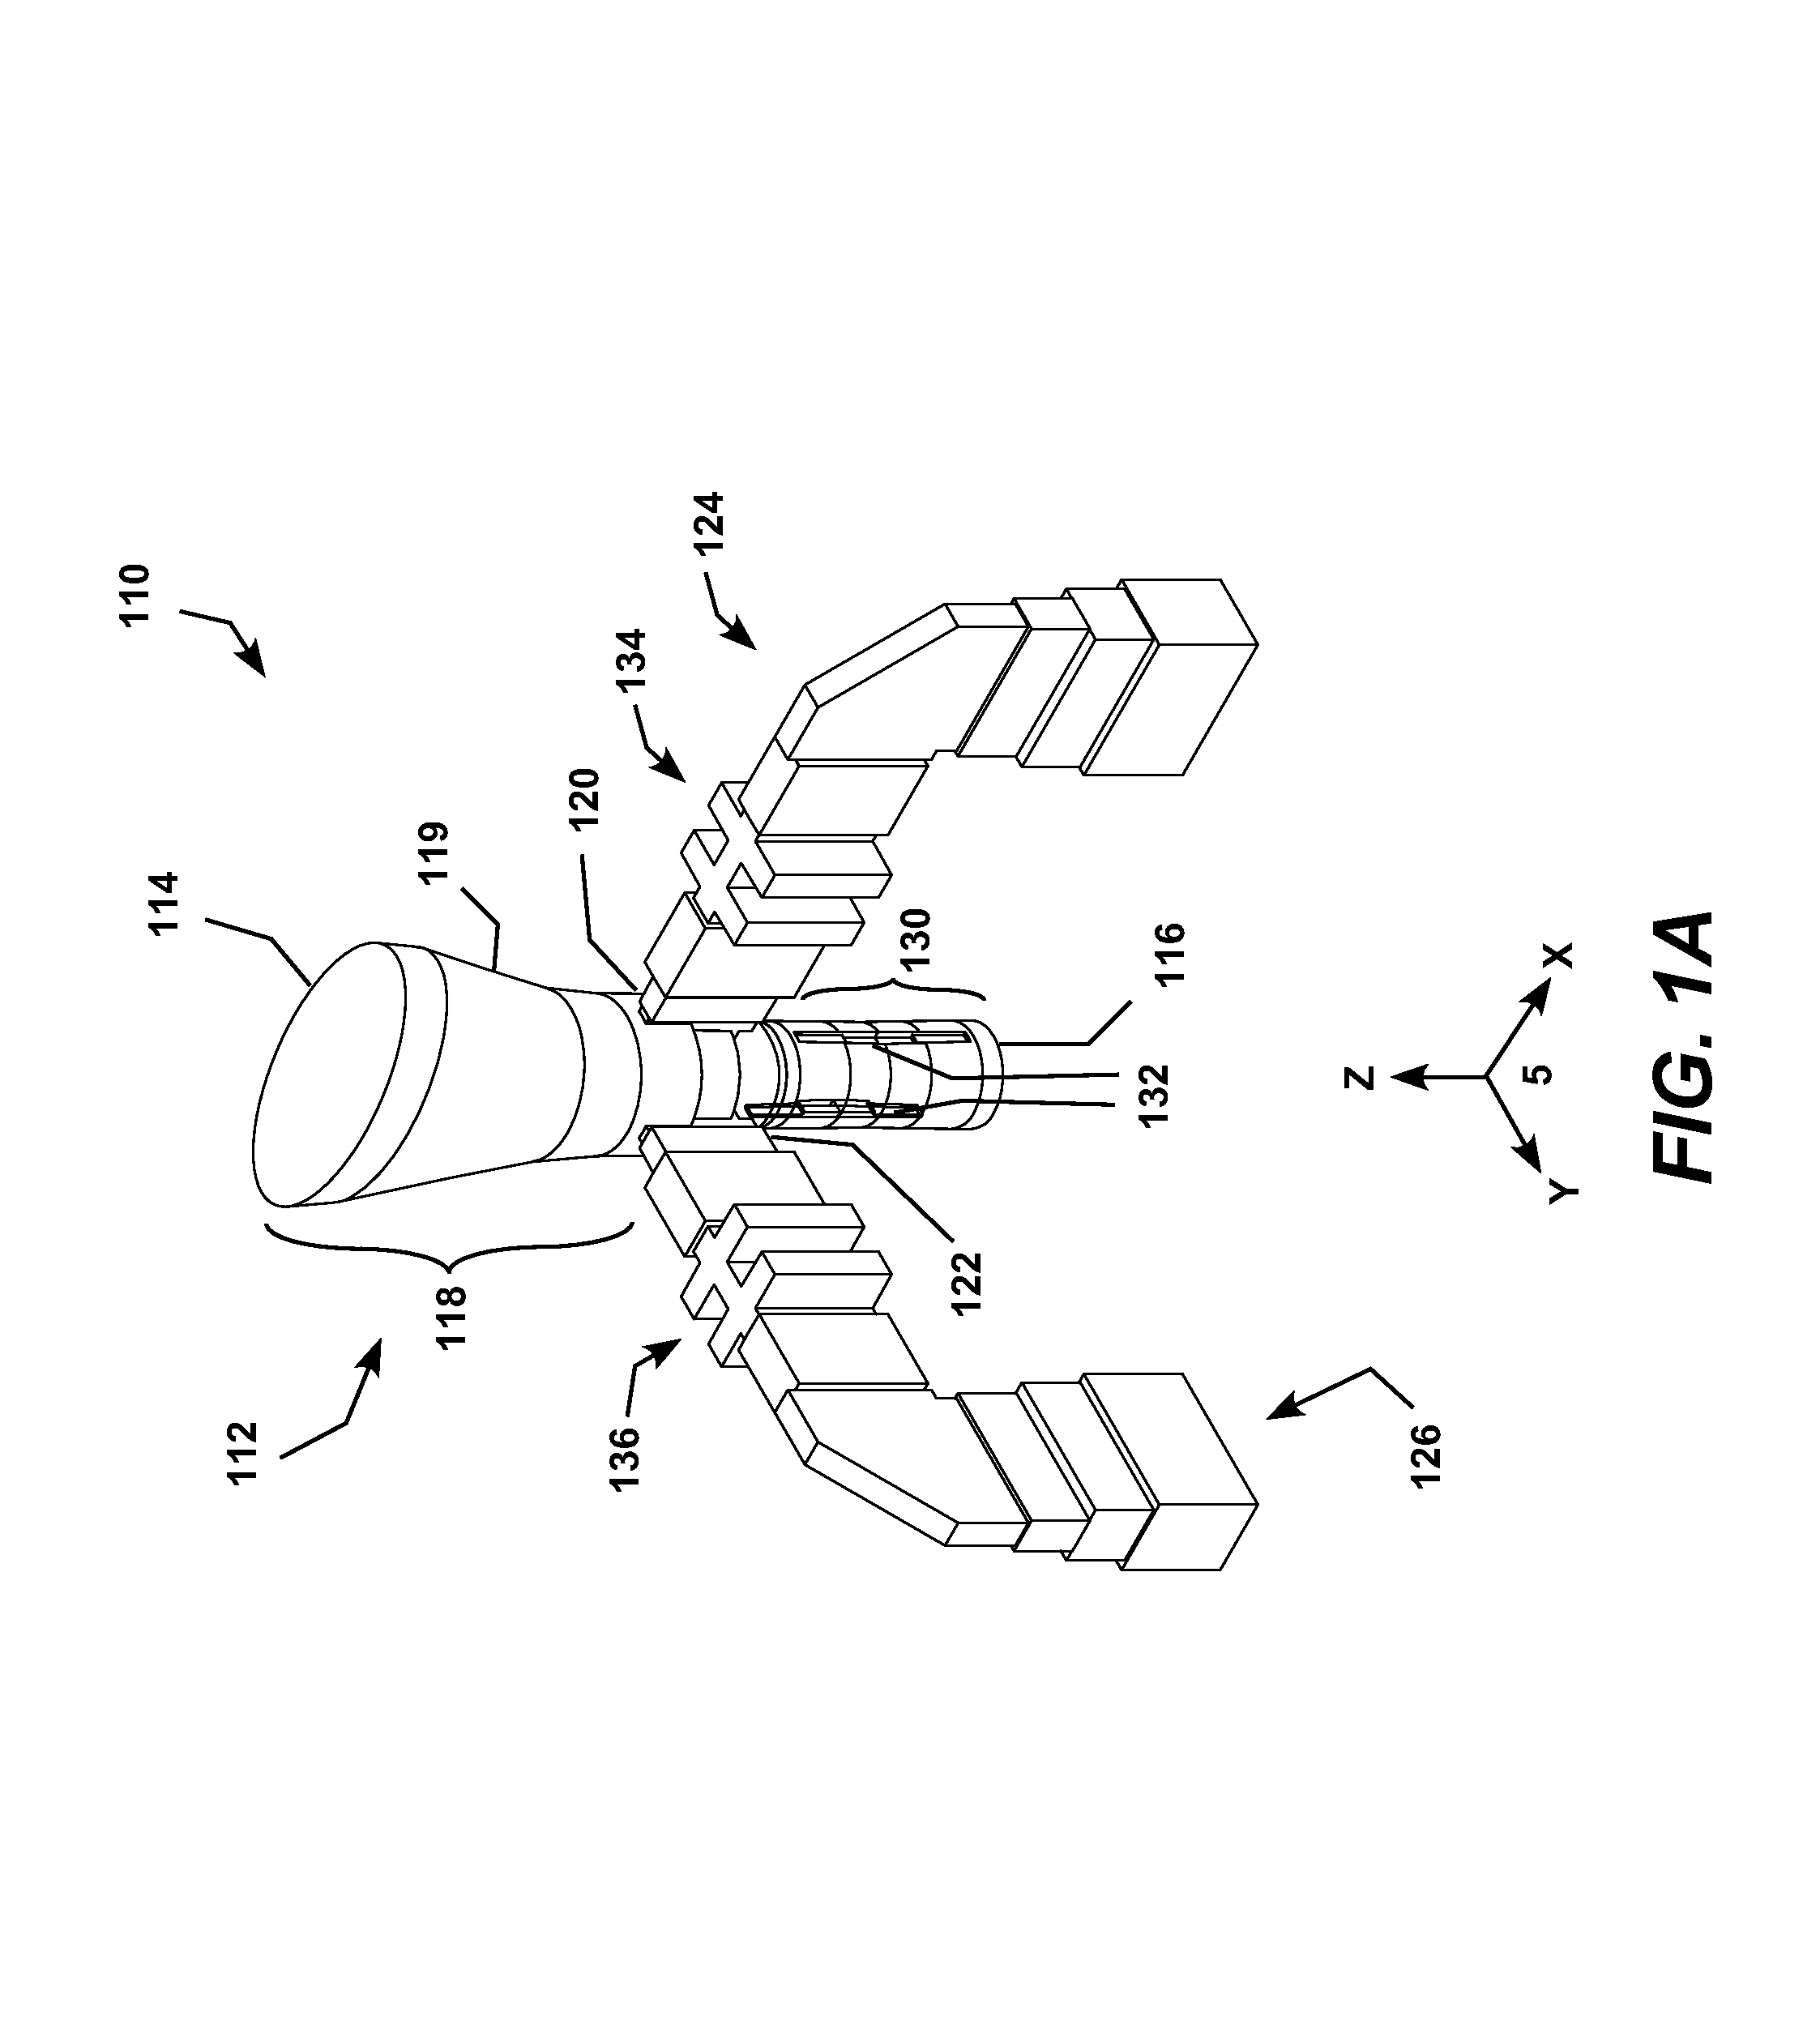 Multi-band antenna for simultaneously communicating linear polarity and circular polarity signals